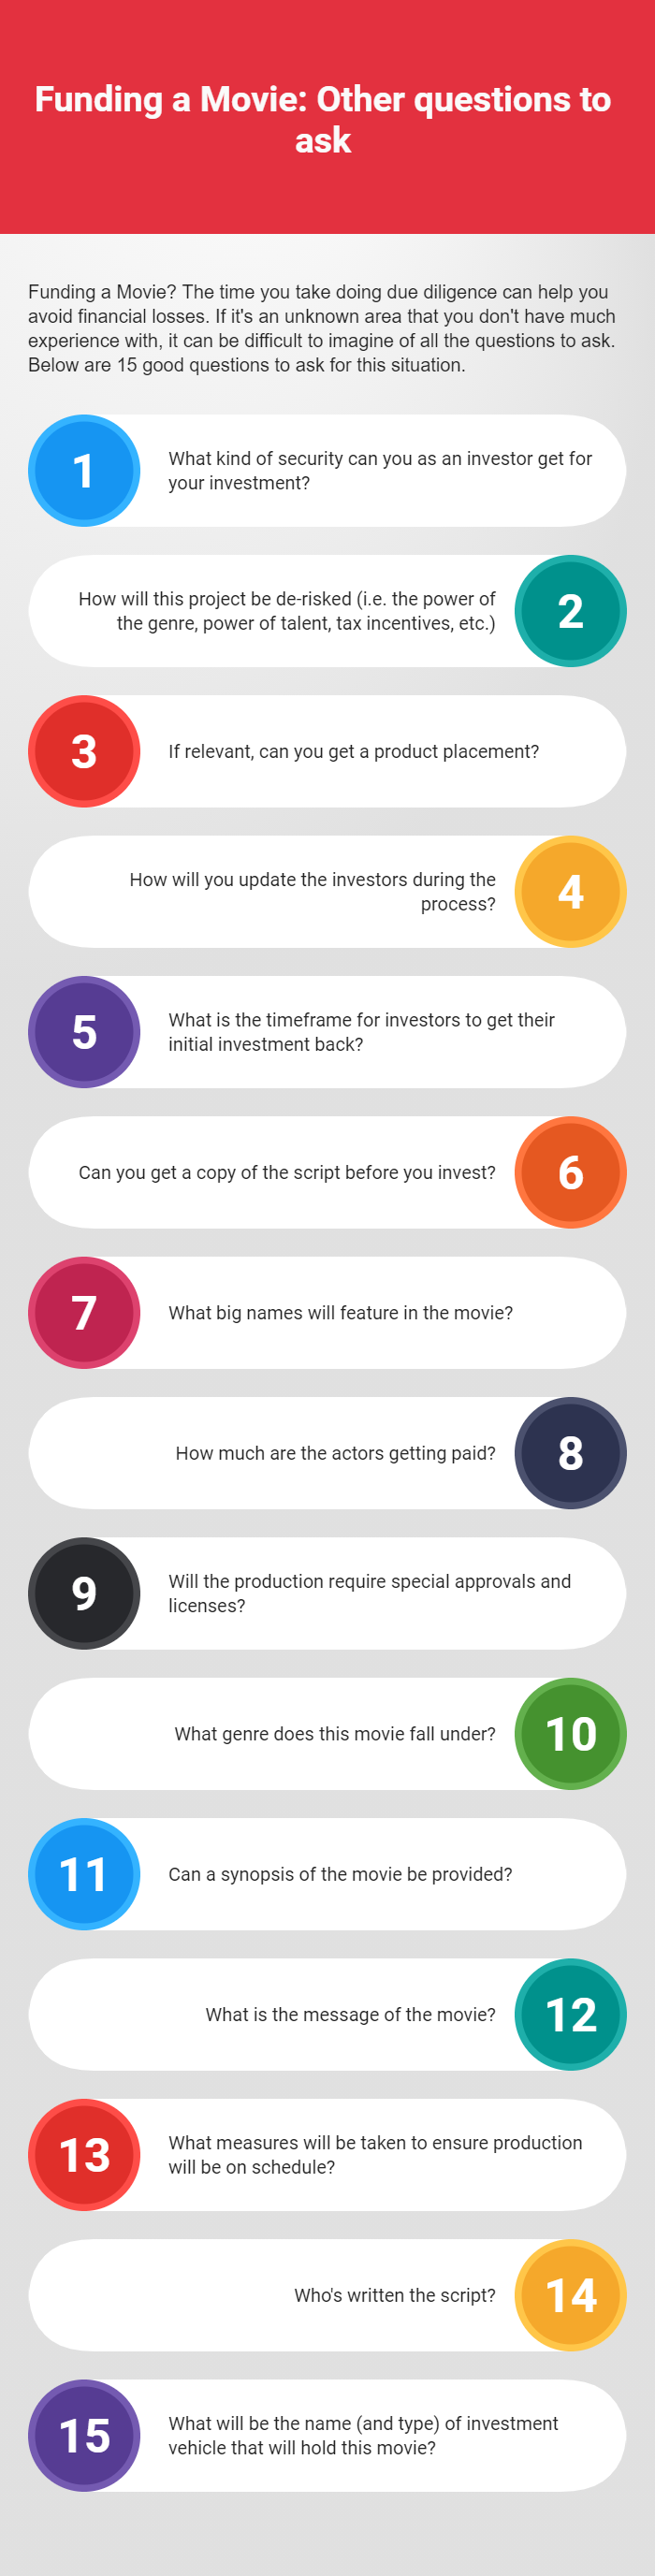 Funding a Movie: Other questions to ask